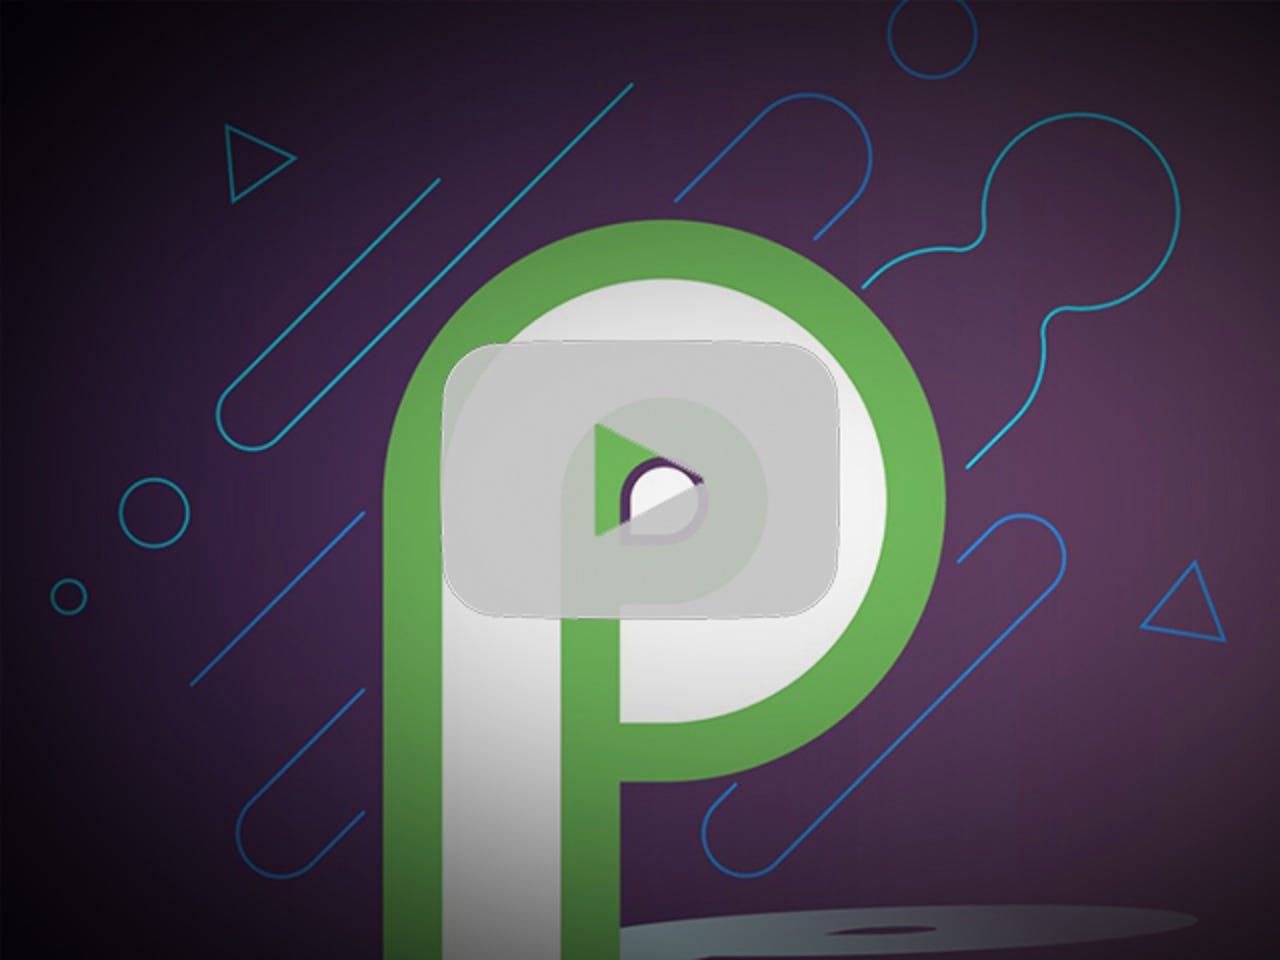 What's new in Google's latest update to Android P?